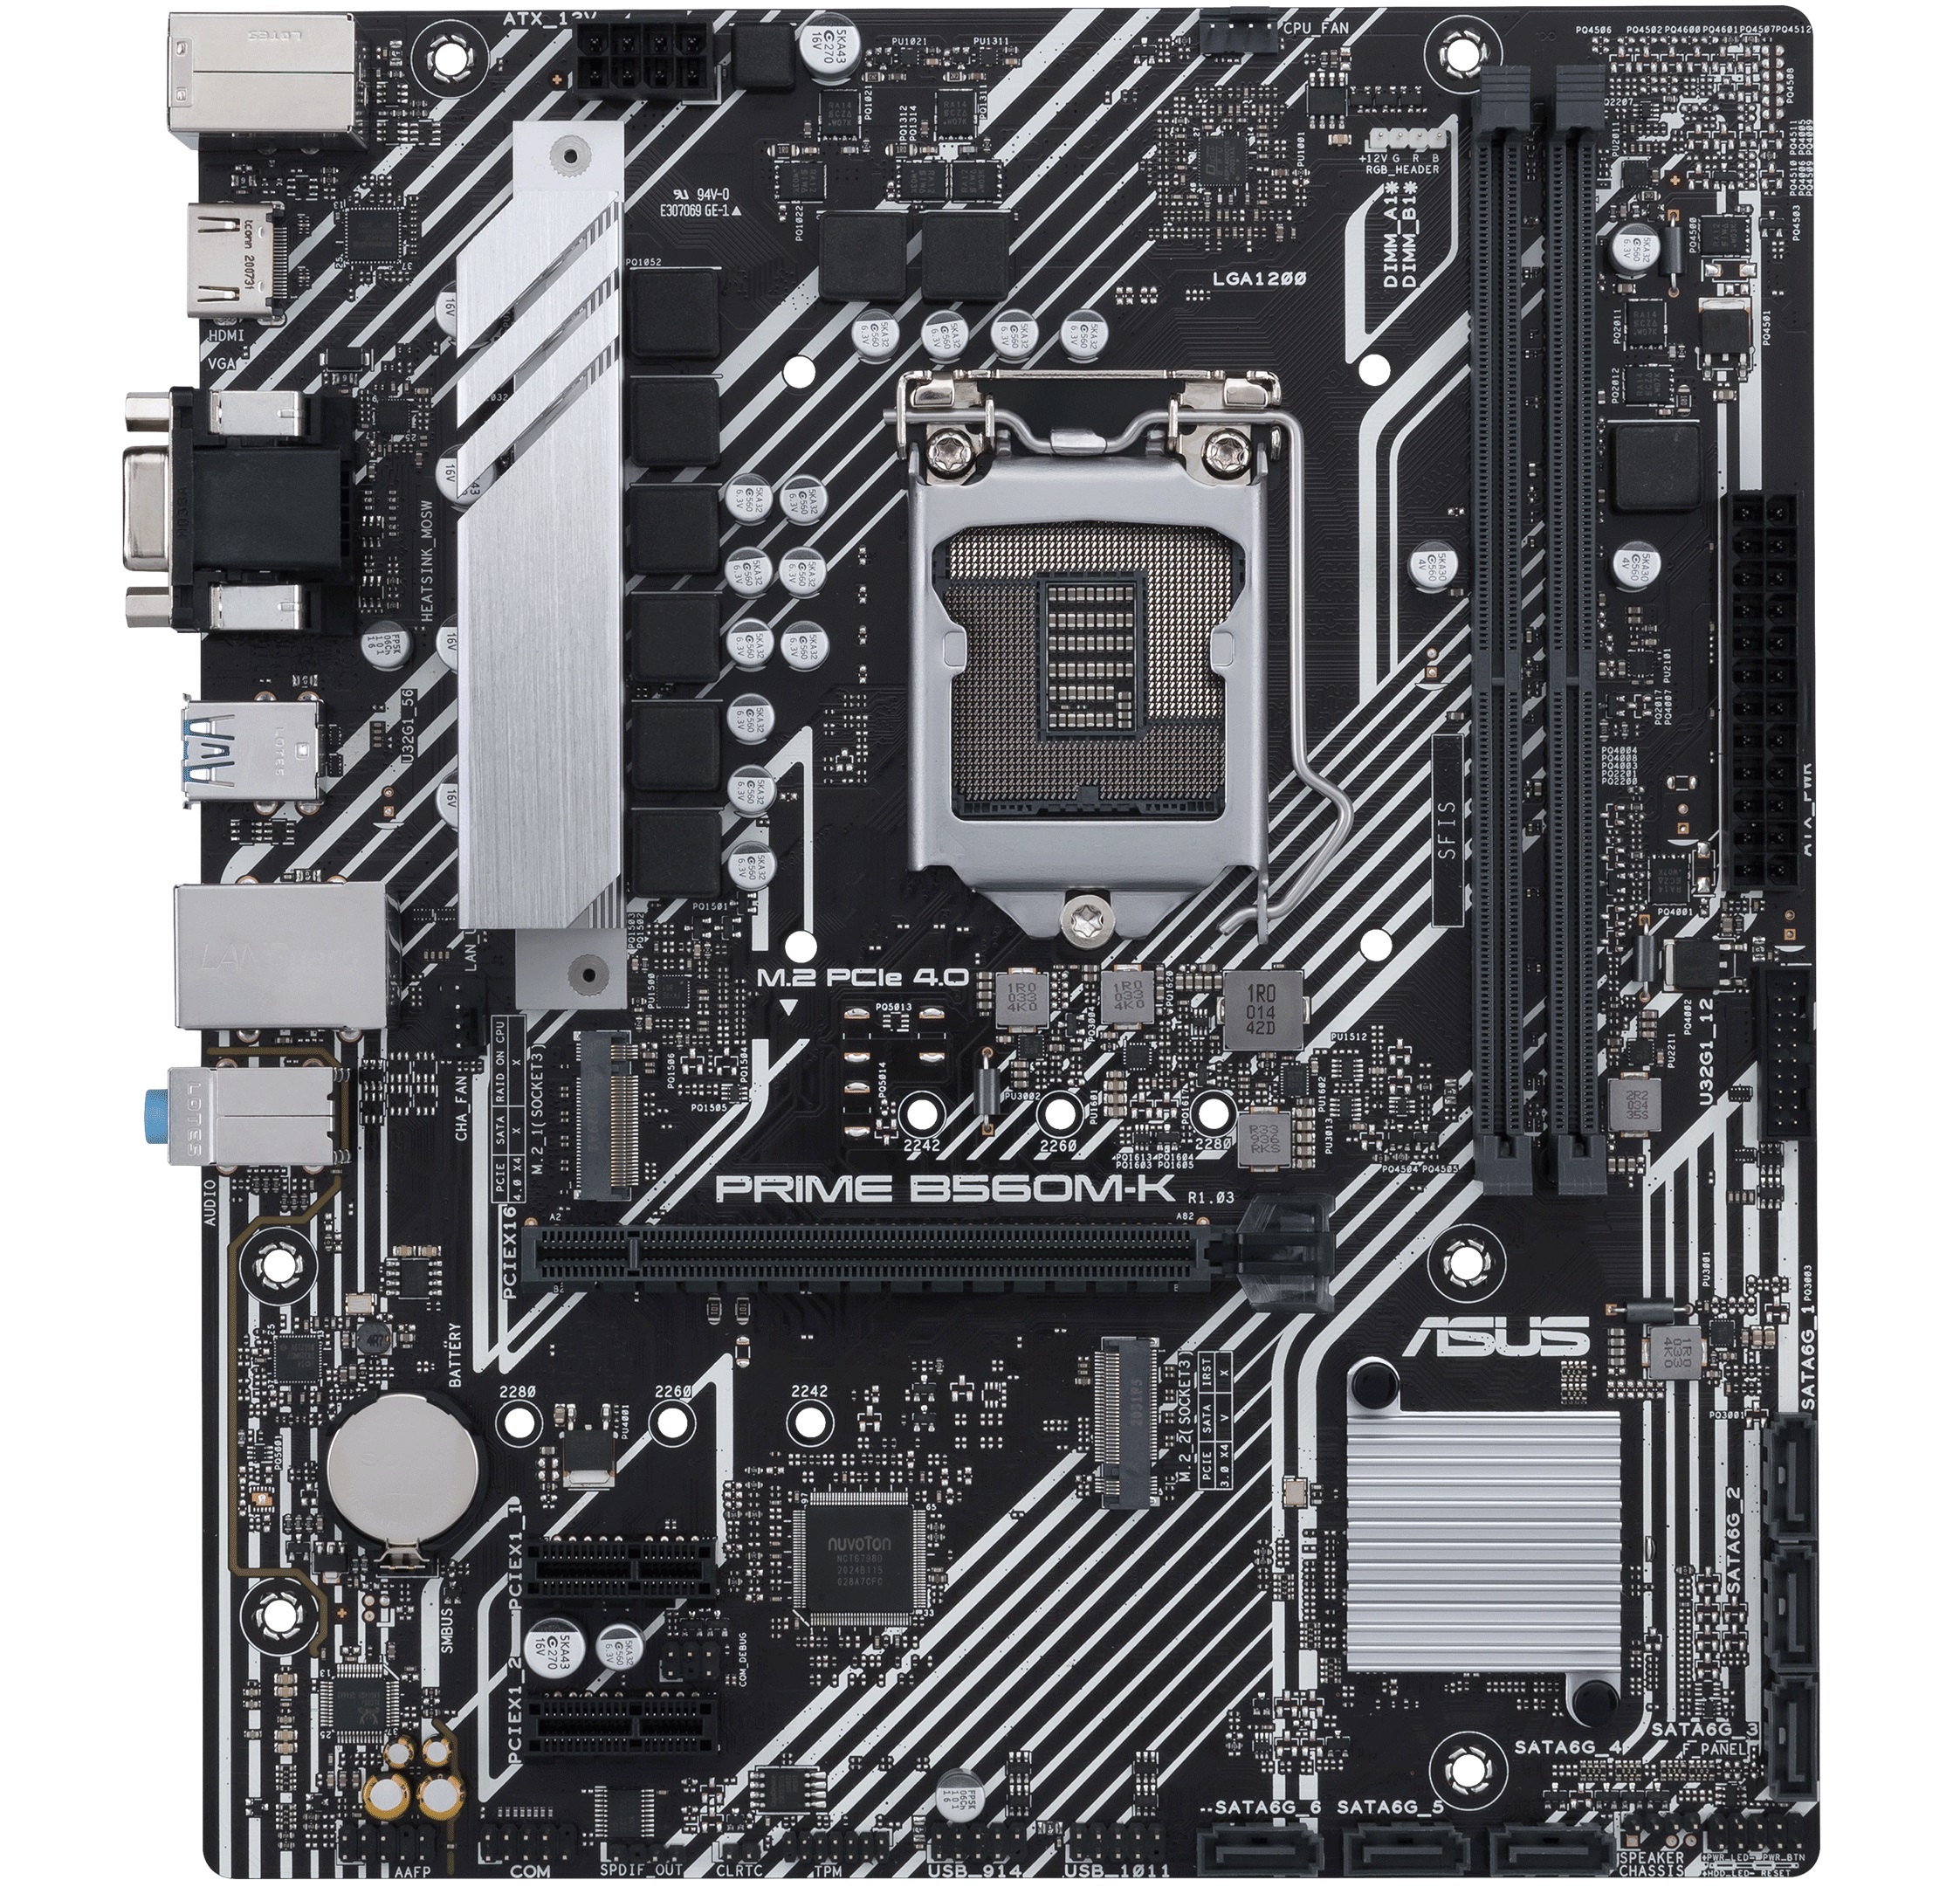 ASUS Prime B560M-K - The Intel B560 Motherboard Overview: 30+